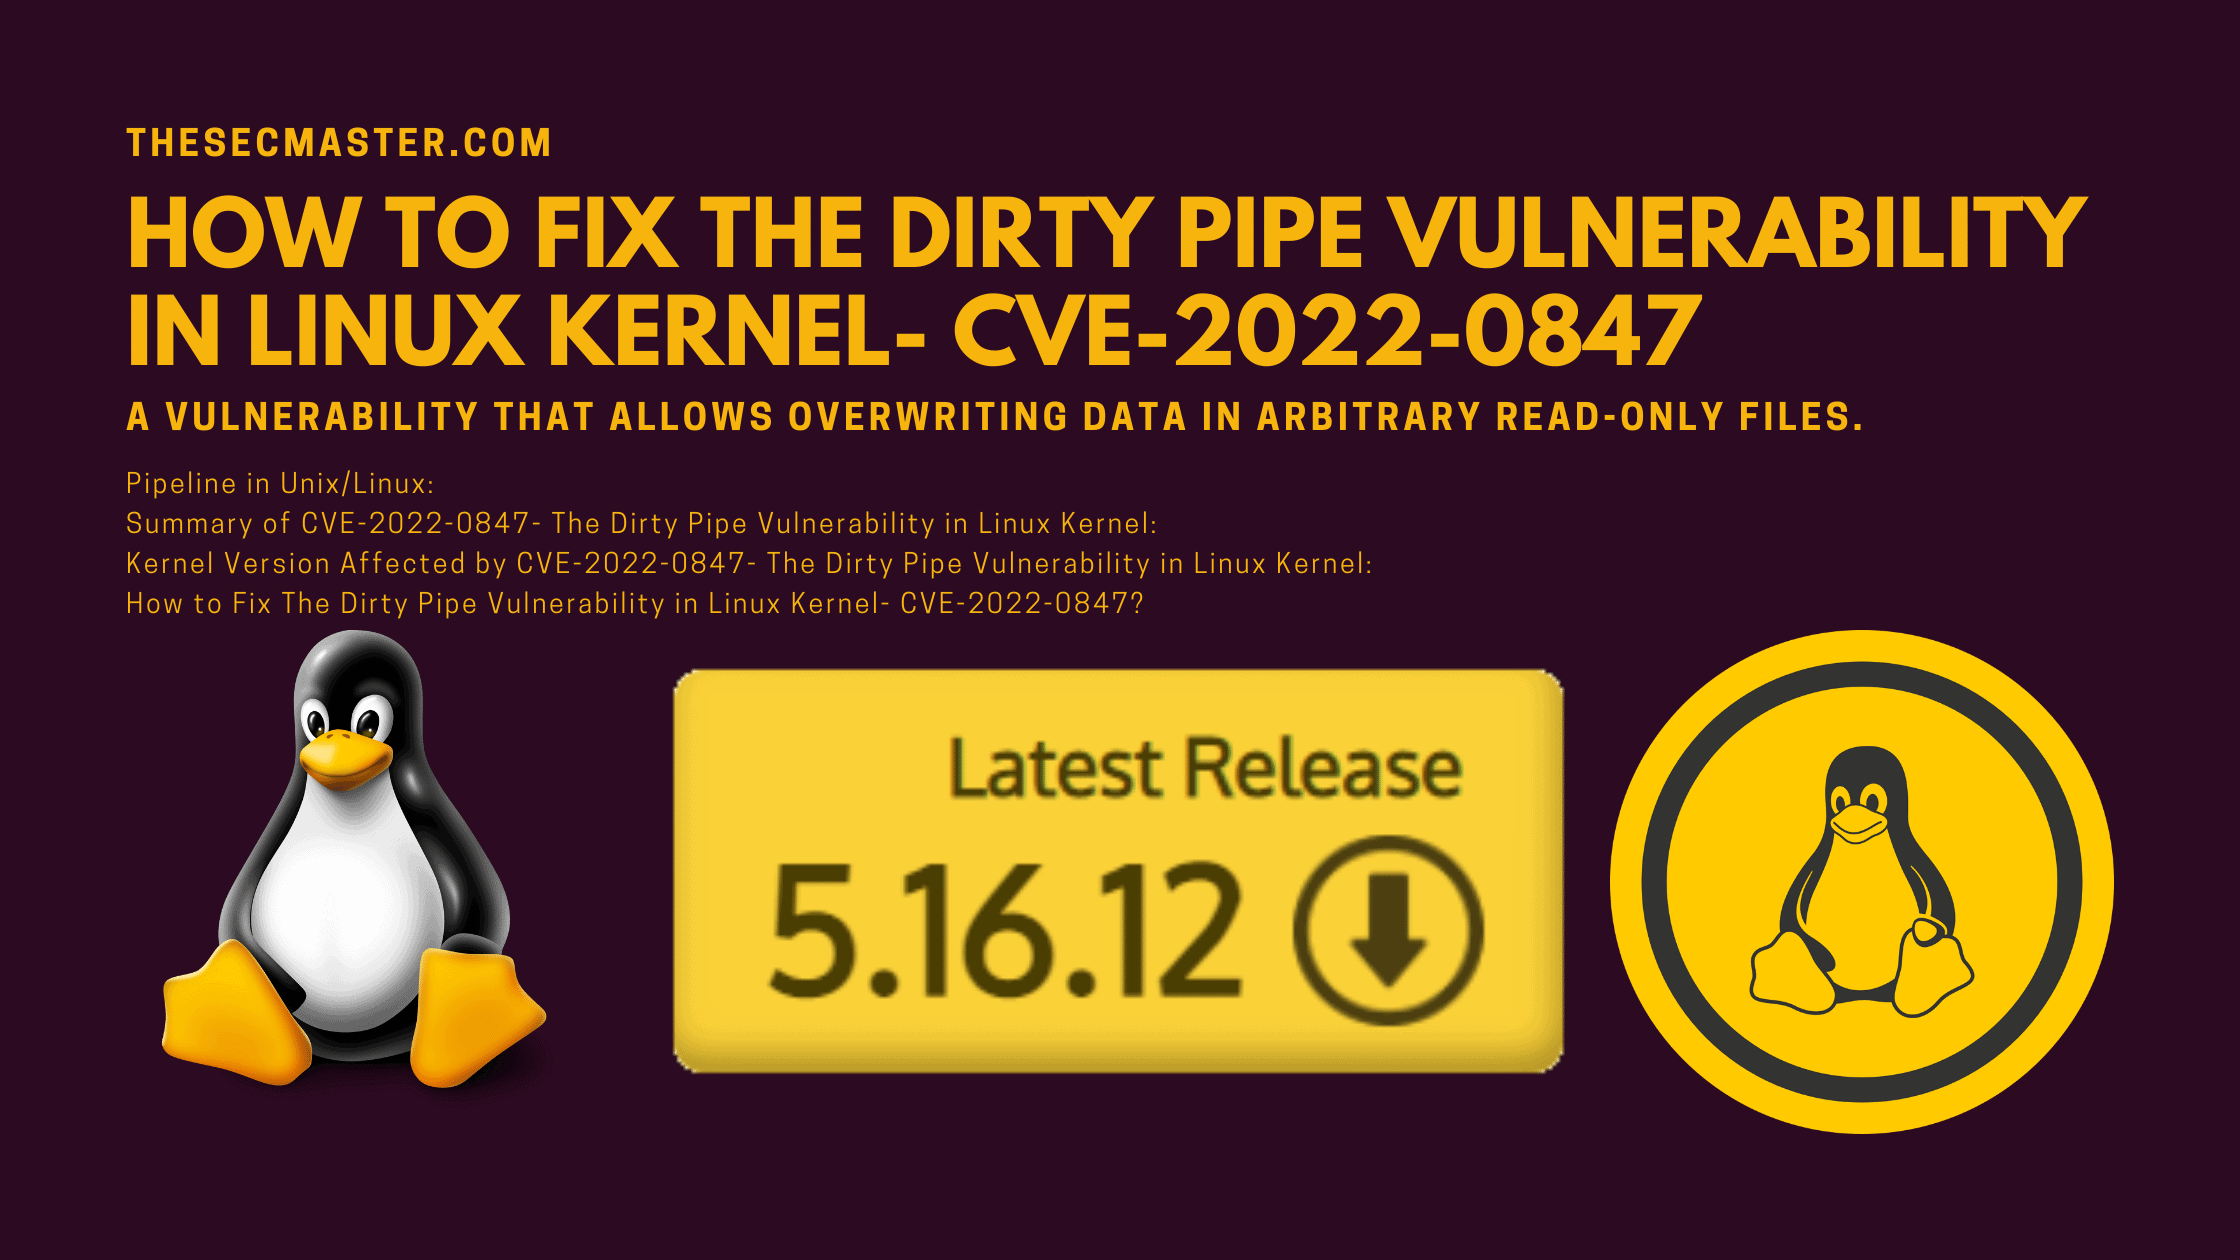 How To Fix The Dirty Pipe Vulnerability In Linux Kernel Cve 2022 0847